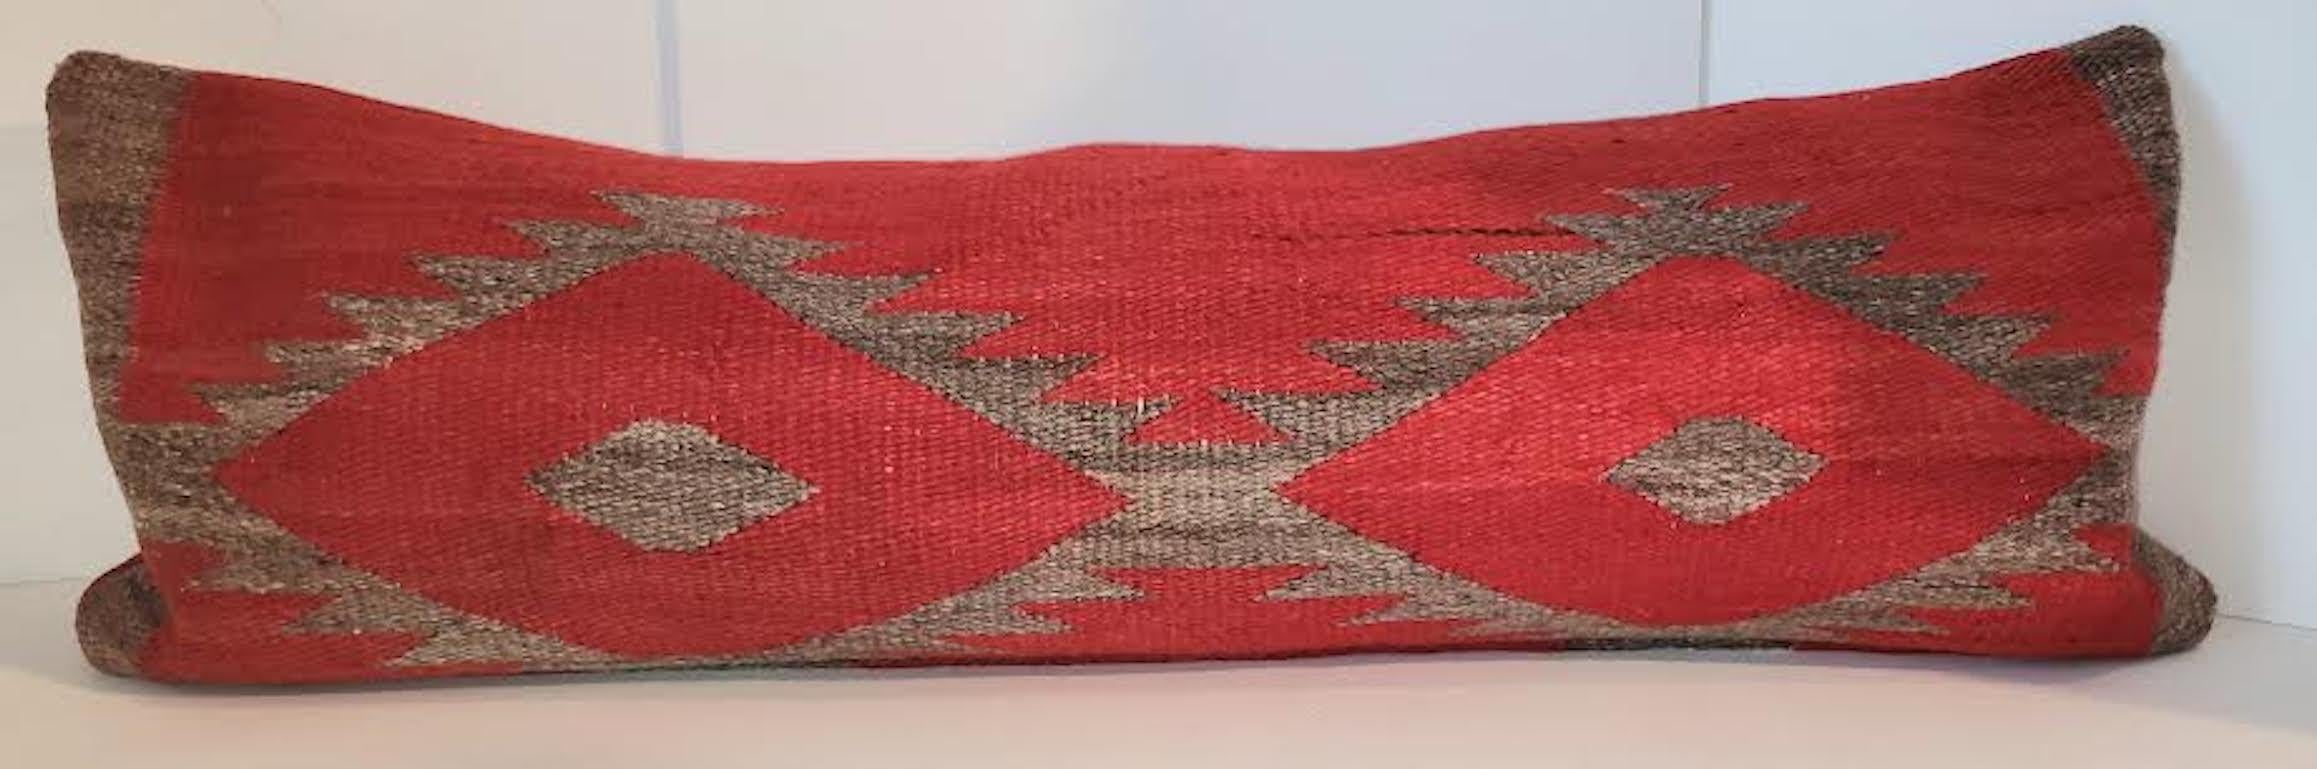 Pair of custom made Early 19th C Navajo Indian Weaving Pillows. Beautiful red Backing with Zipped Casing for Cleaning. Feather and Down inserts.